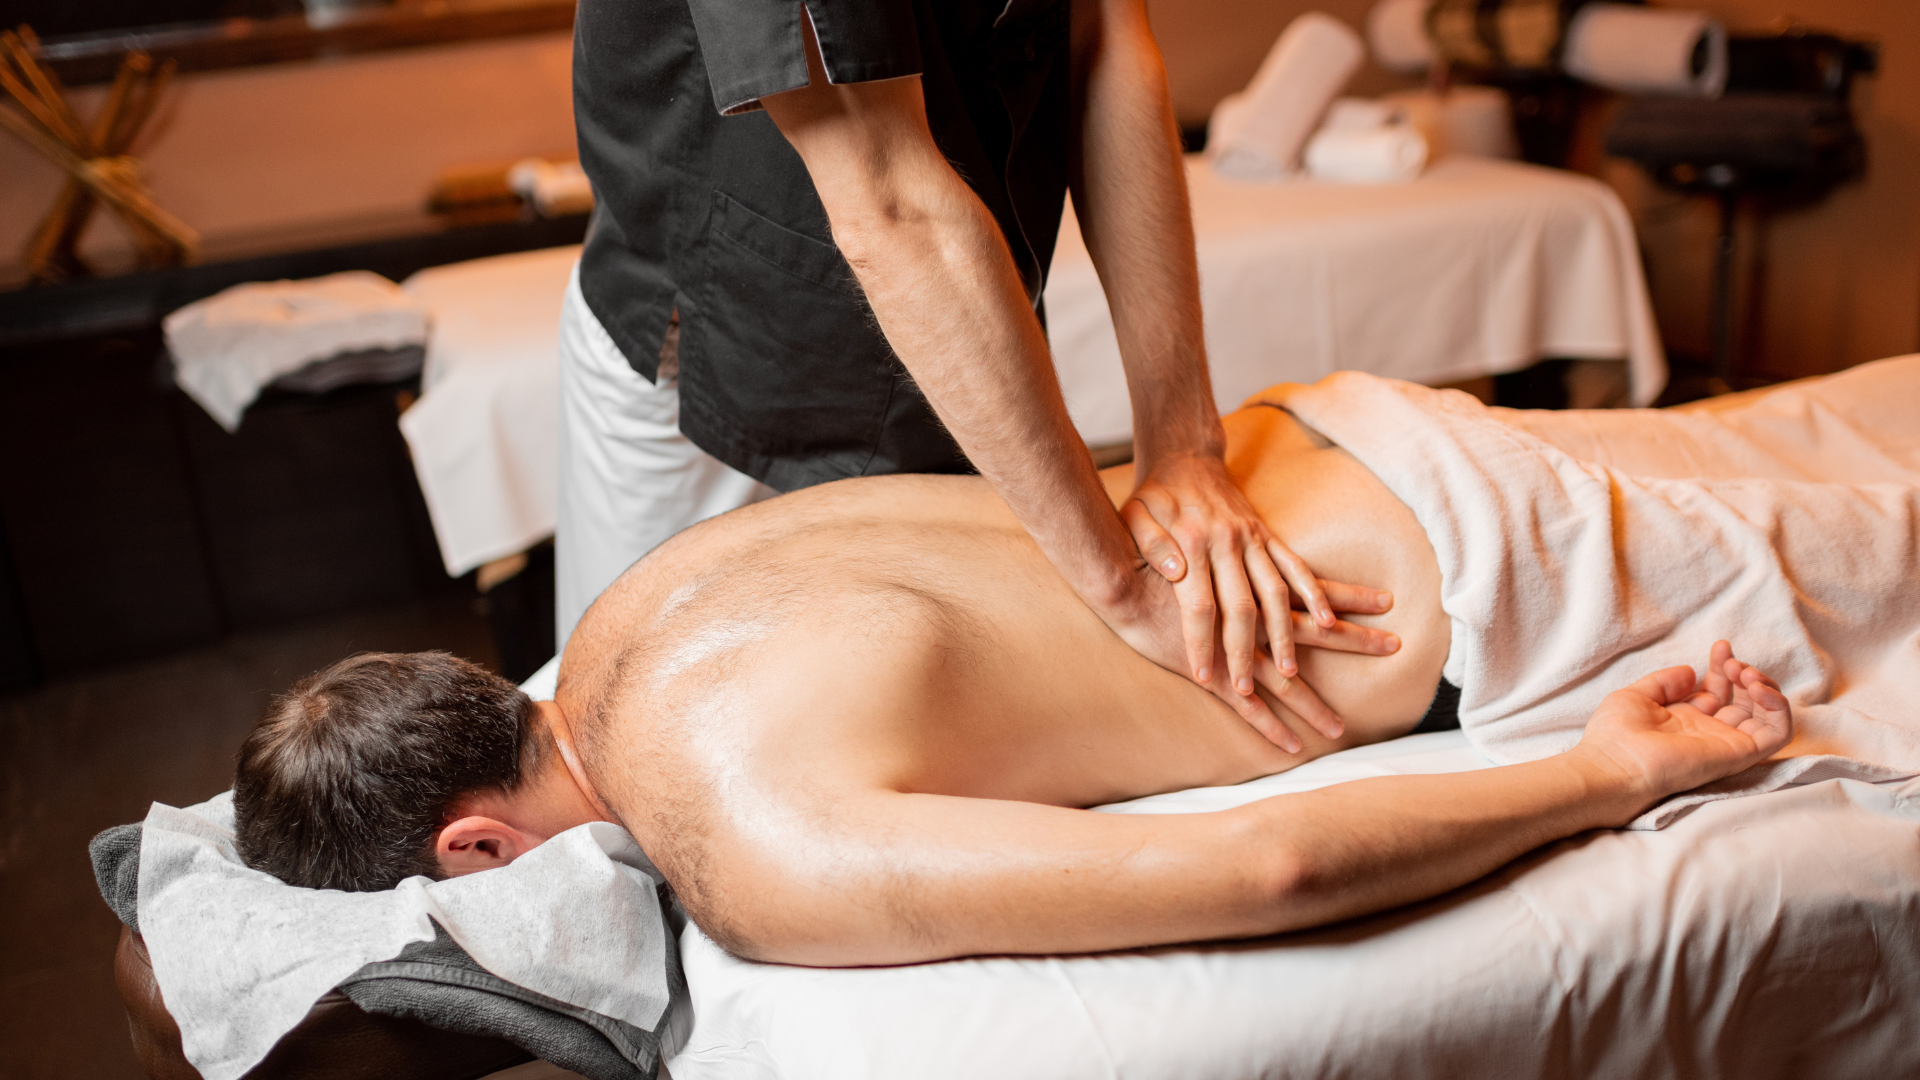 Choosing between deep tissue and Swedish massage depends on your clients' needs